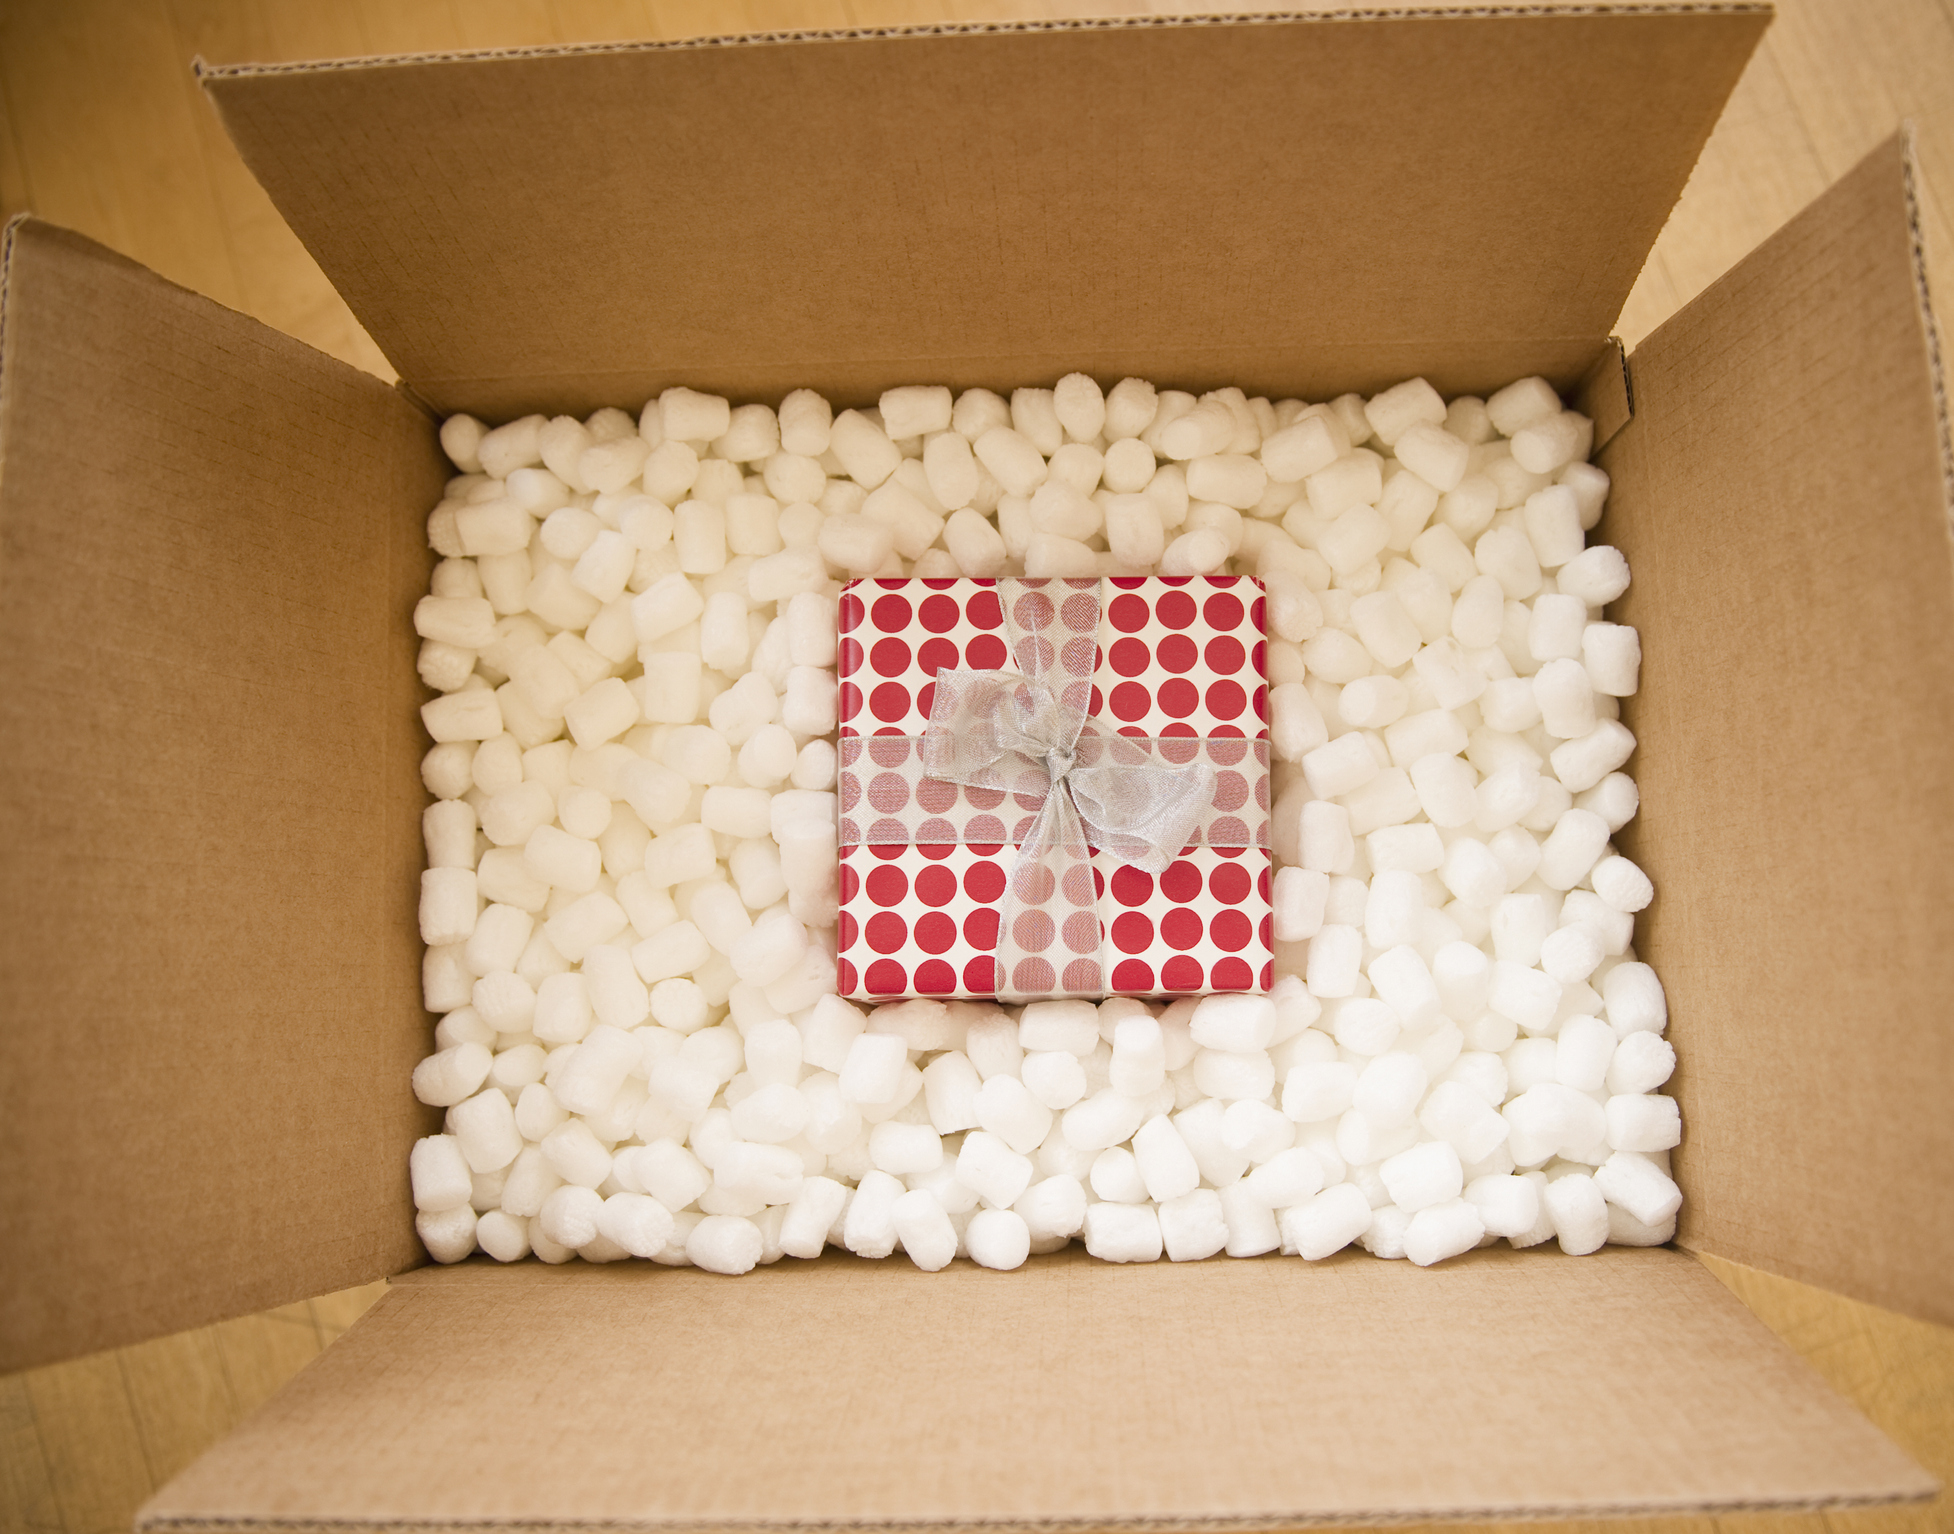 Preparing Your Supply Chain for the Holiday Season: Tips from ITG